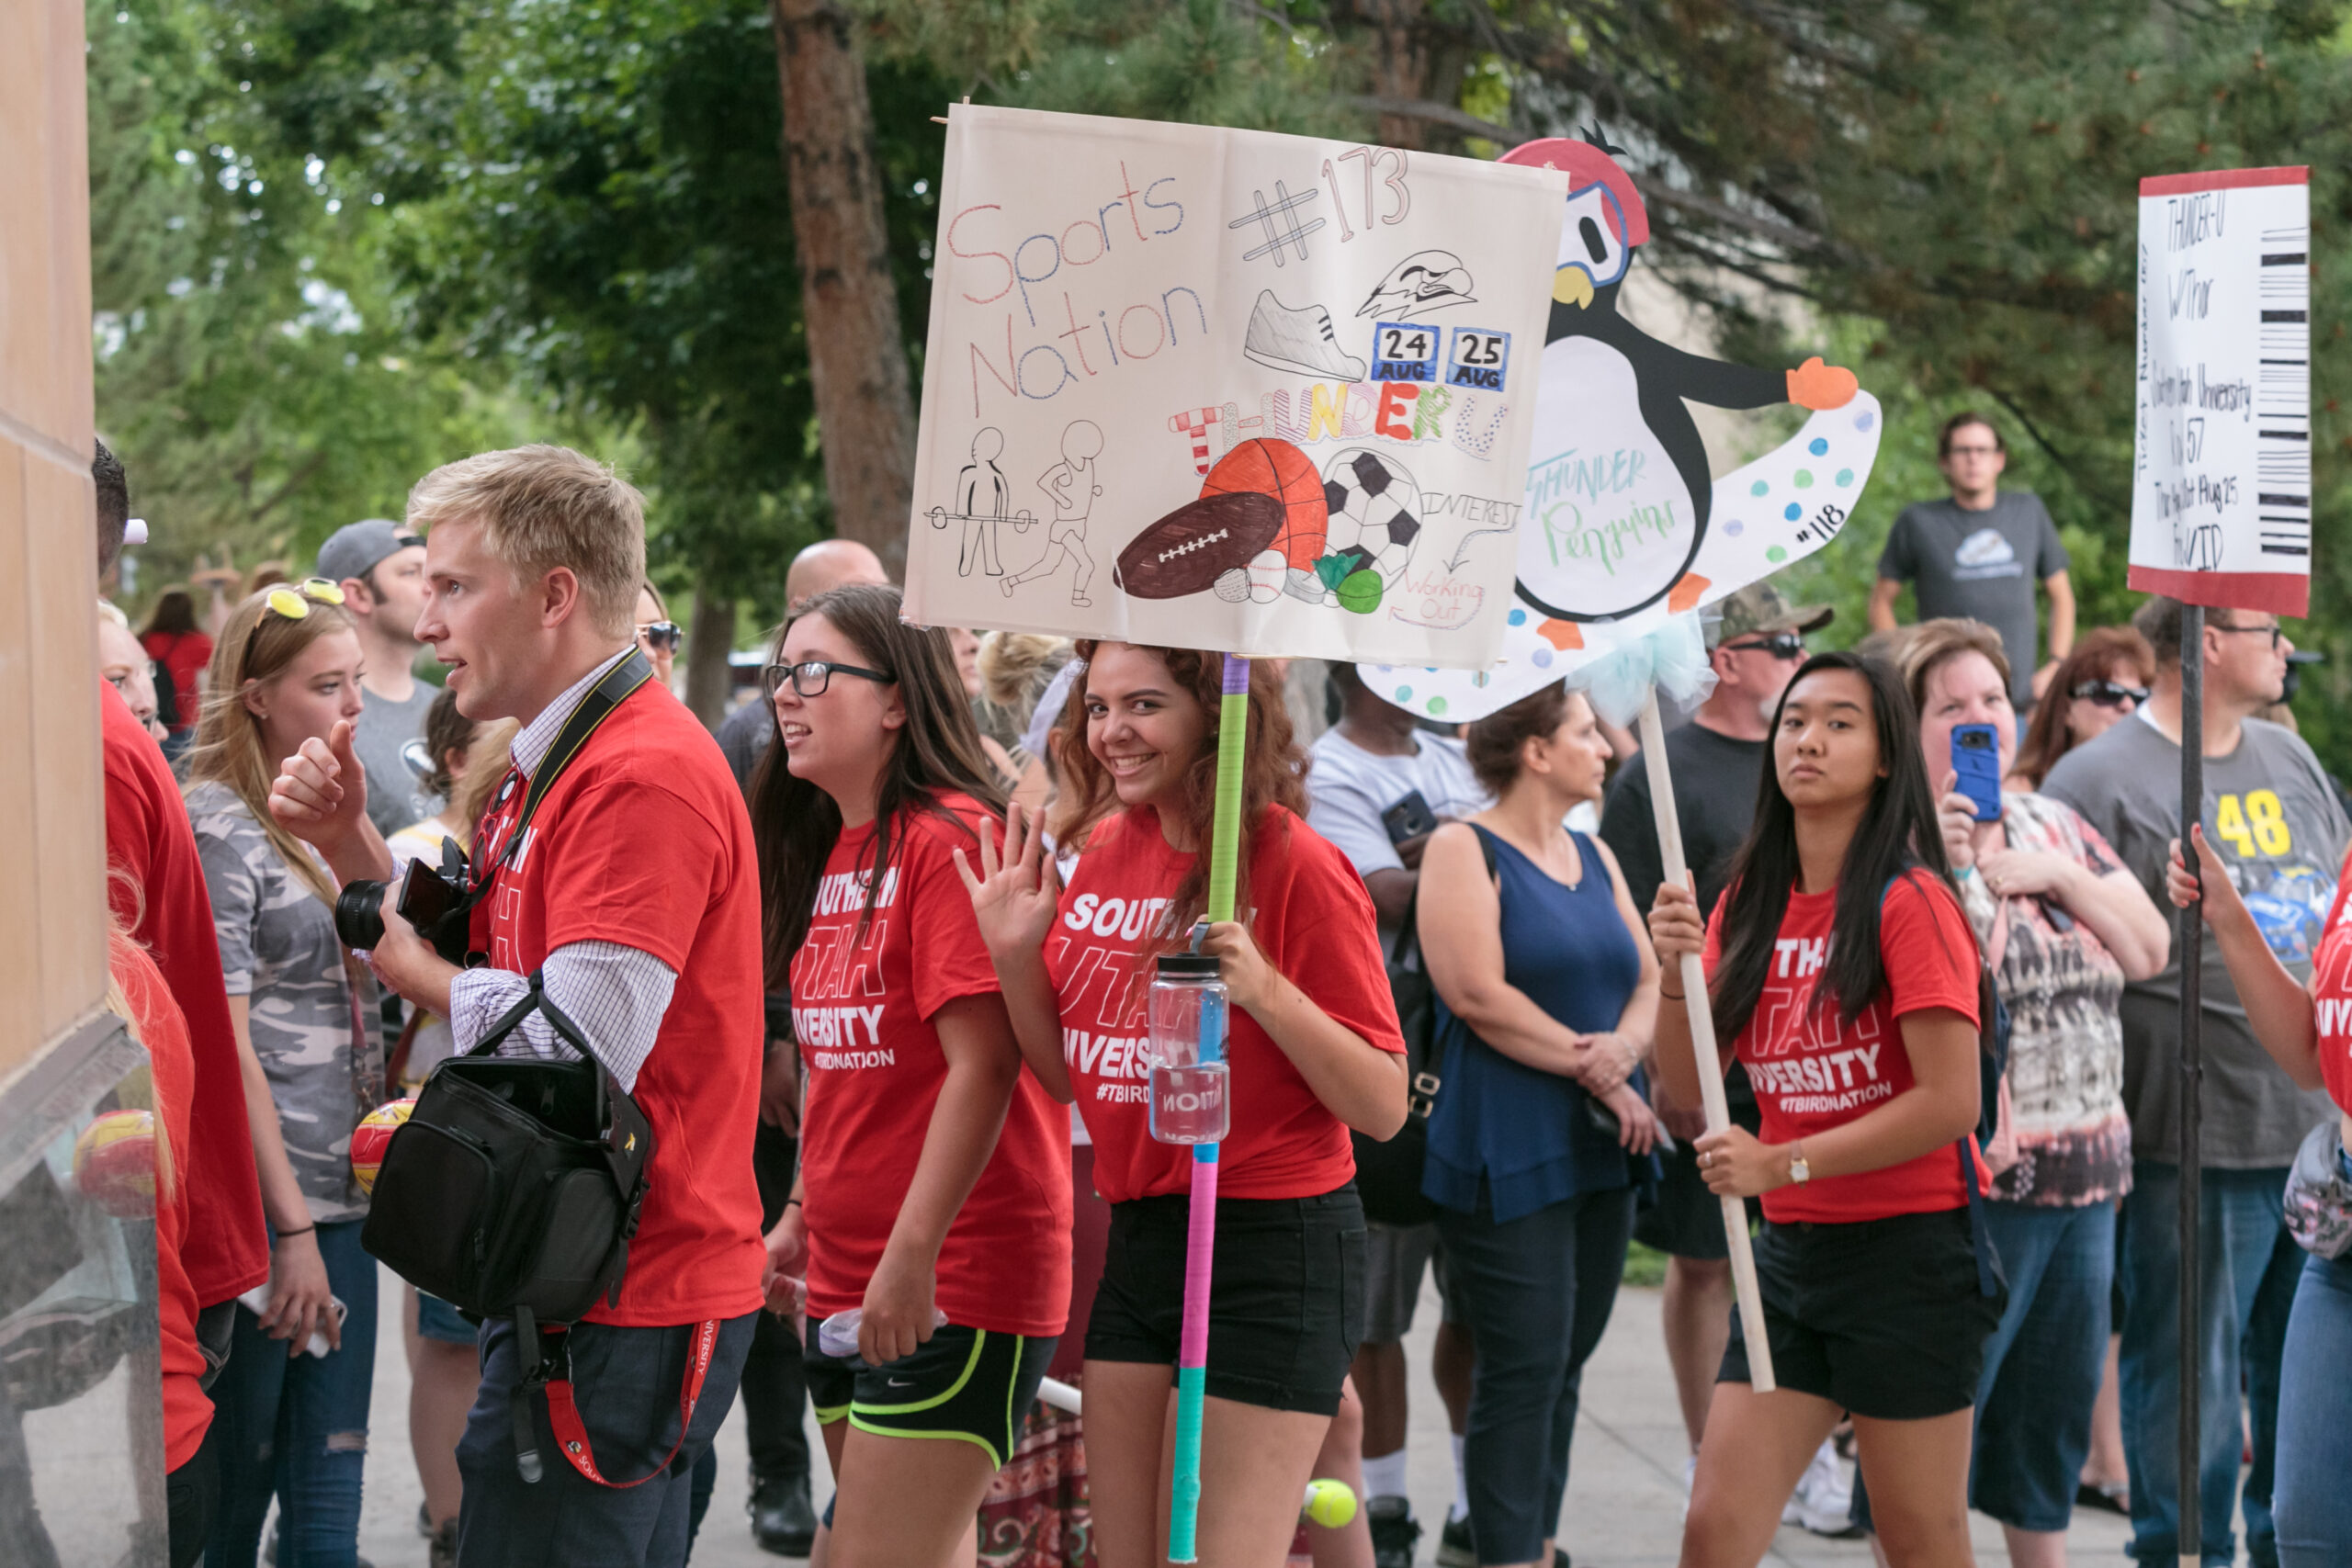 Some freshman orientation ideas revolve around certain landmarks on a college campus. At Southern Utah University, incoming students are cheered by faculty, staff and students as they walk underneath the Carter Carillion bell tower.